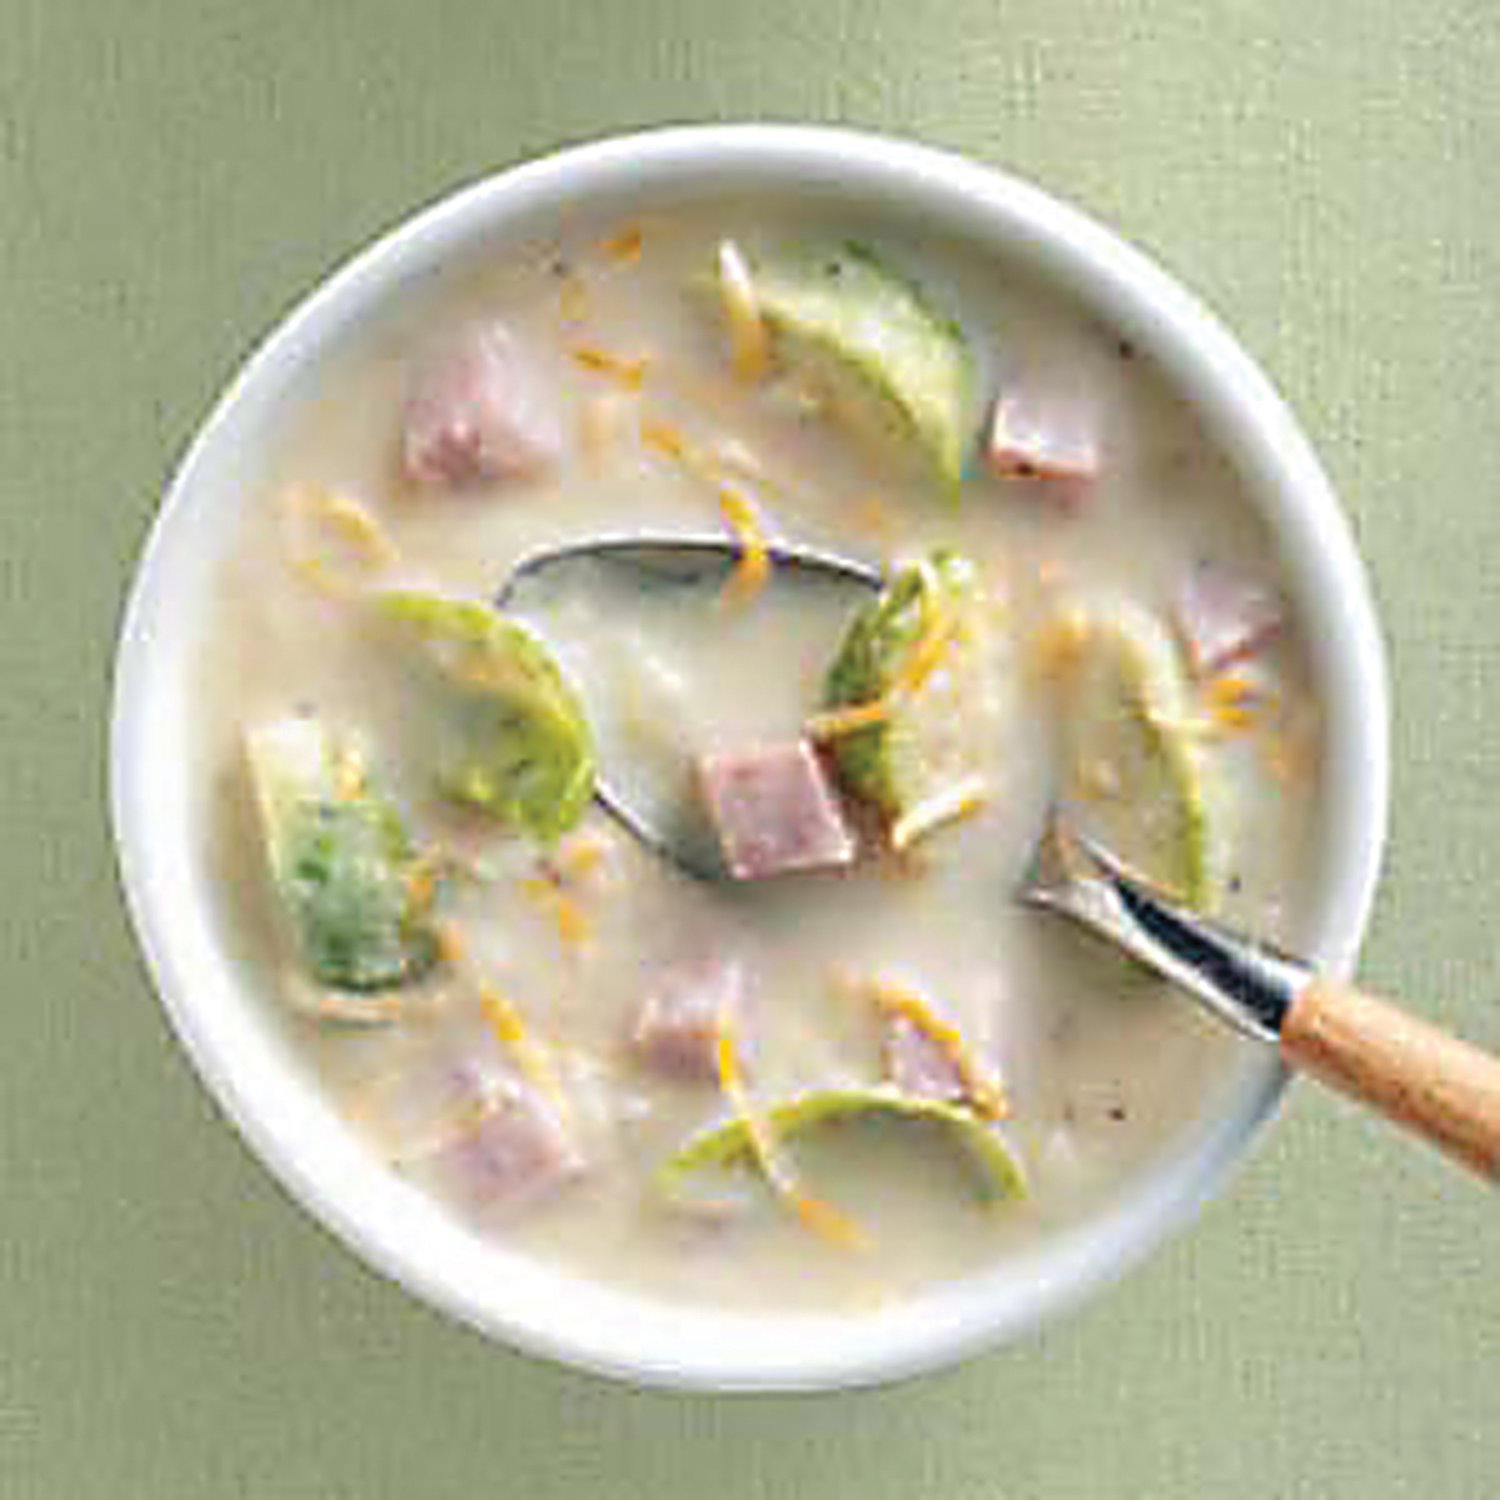 If you can’t wait for the Soup-A-Thon Cook-off at the Lambertville-New Hope Winter Festival, this recipe will warm you up. Photograph by Tasteofhome.com